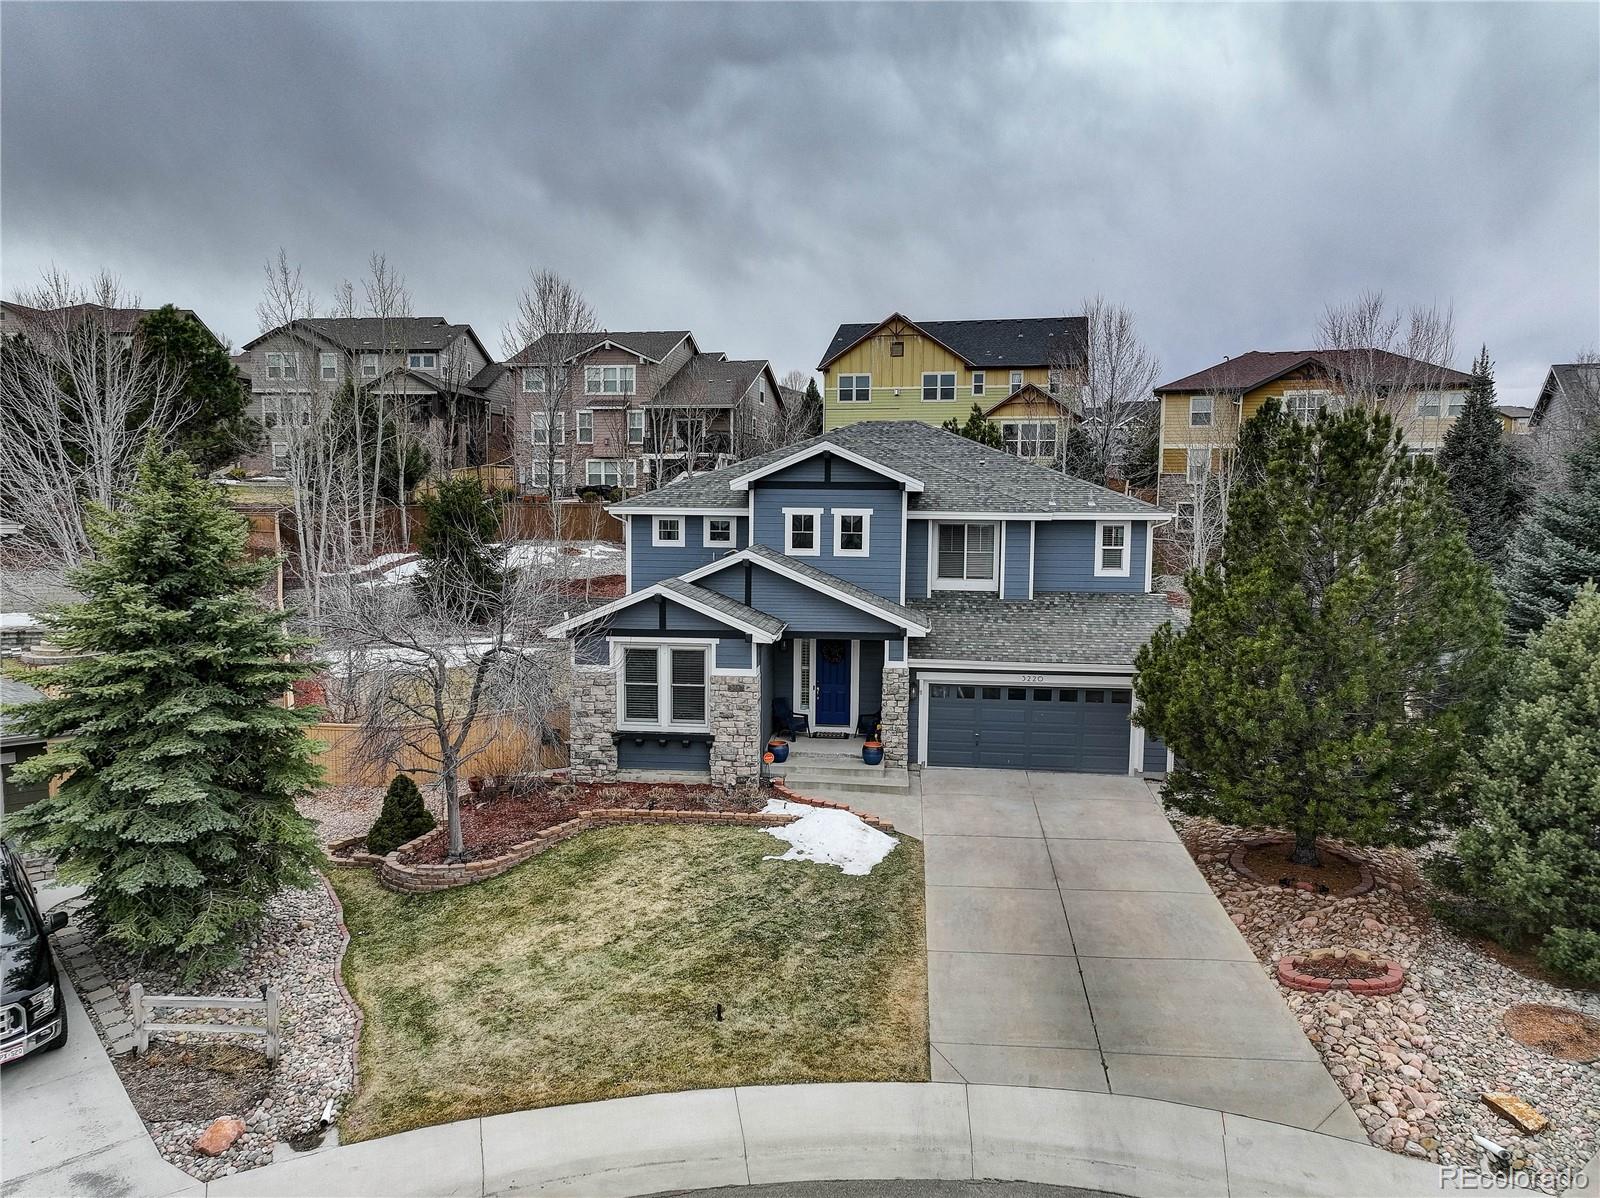 3220  chandon court, Highlands Ranch sold home. Closed on 2024-04-24 for $1,060,000.